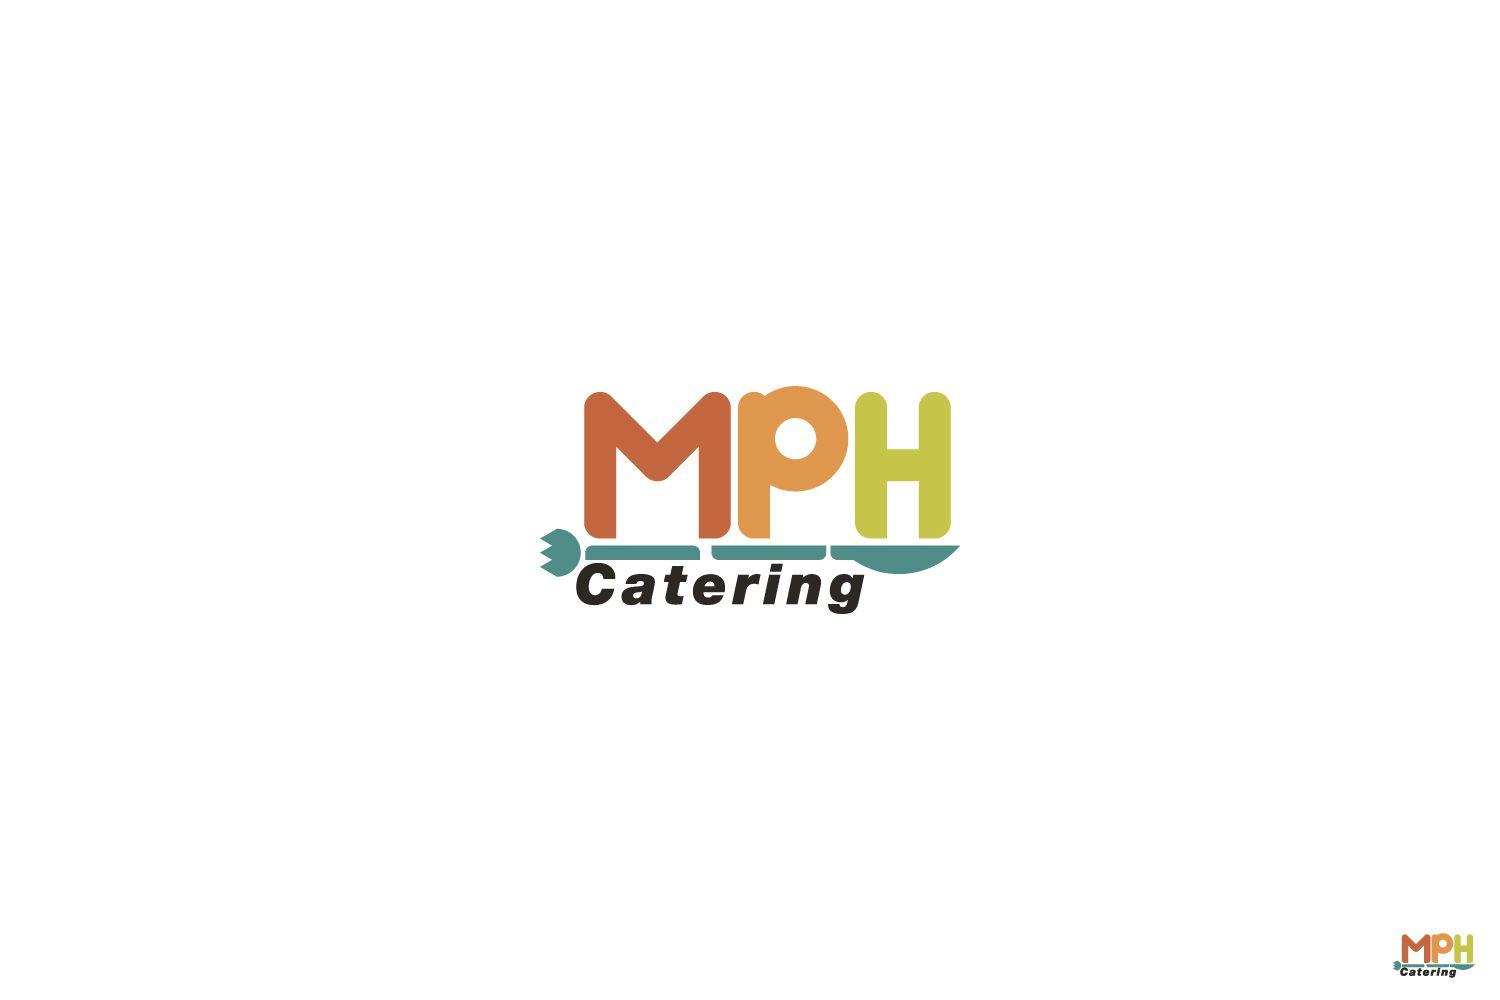 Mph Logo - Catering Logo Design for MPH Catering by Creativefan | Design #15968563